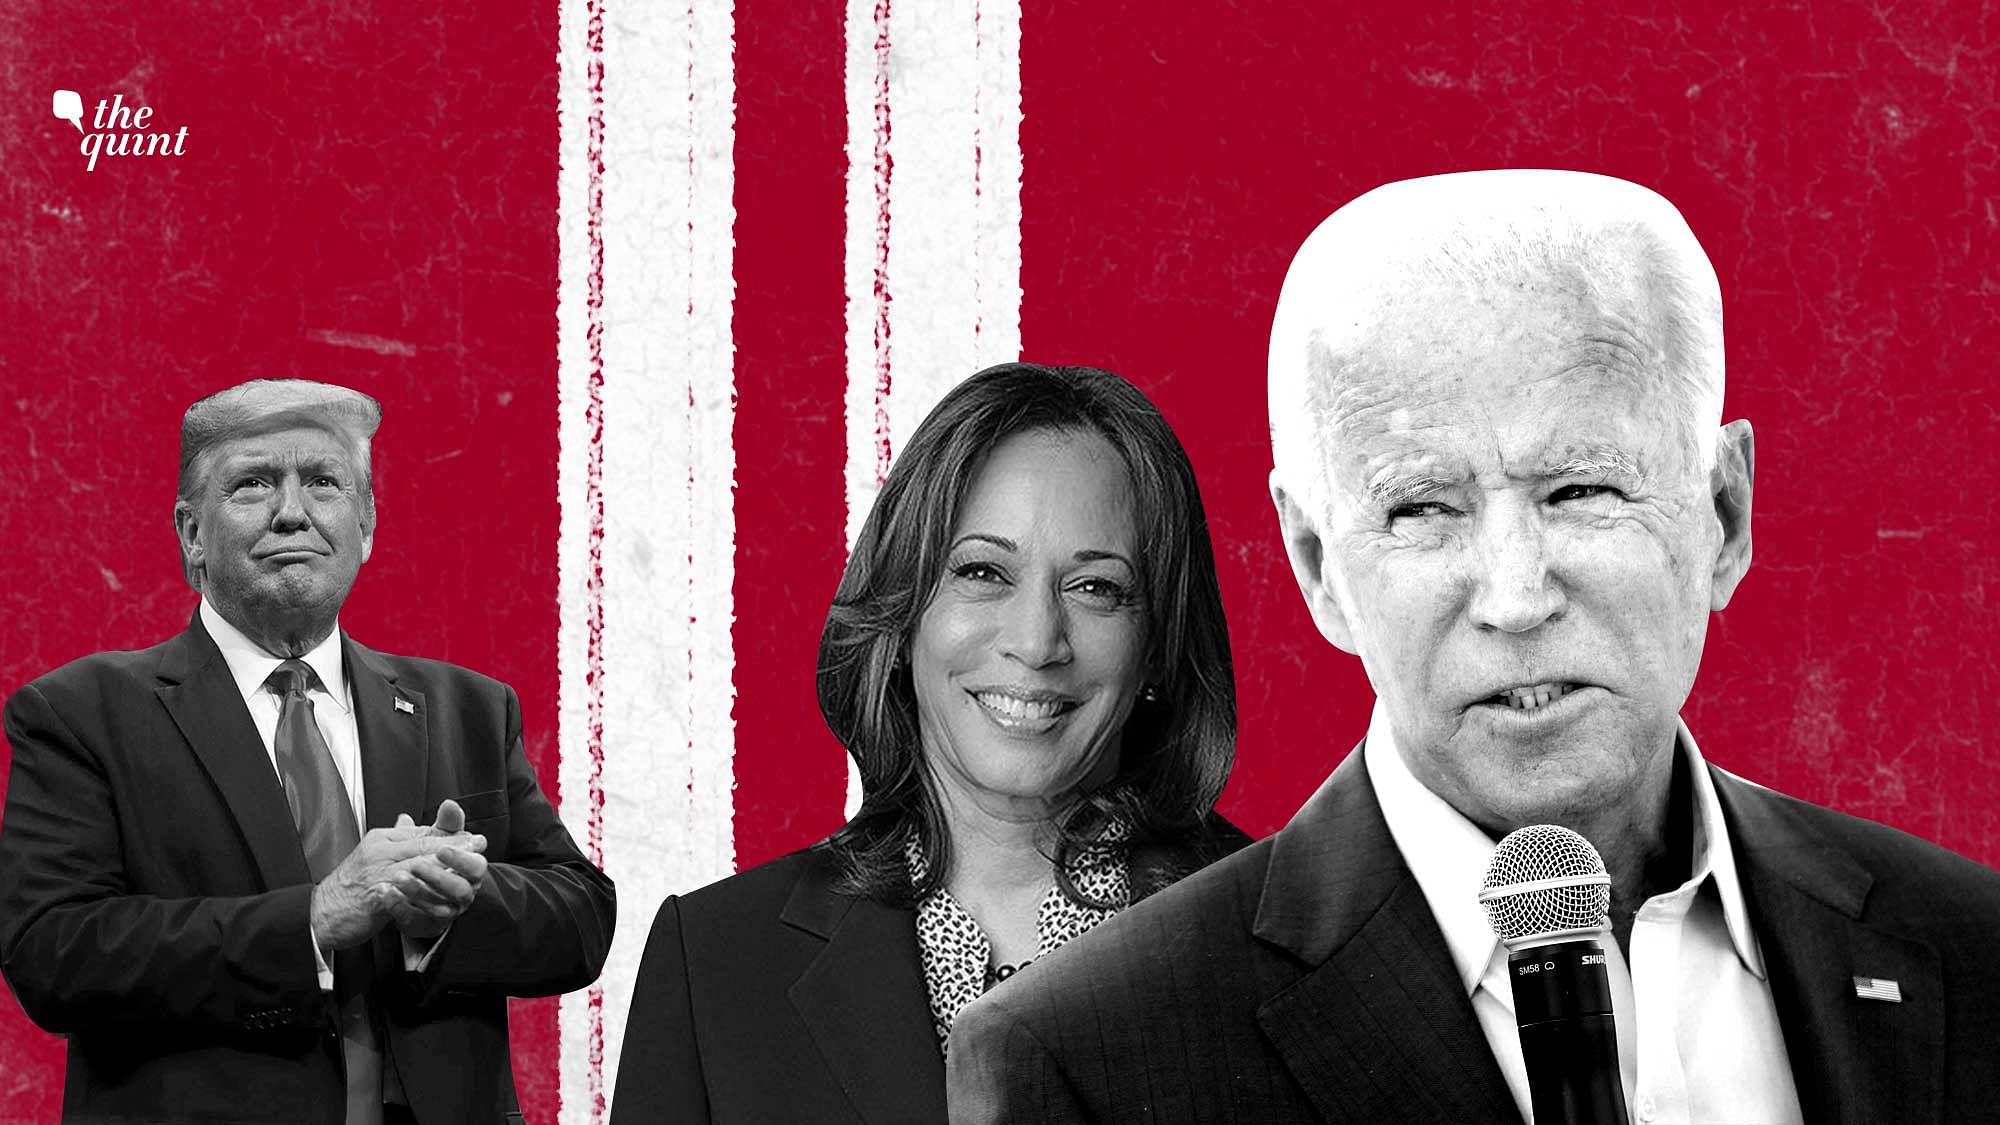 The many ‘Firsts’ of US Presidential Election 2020